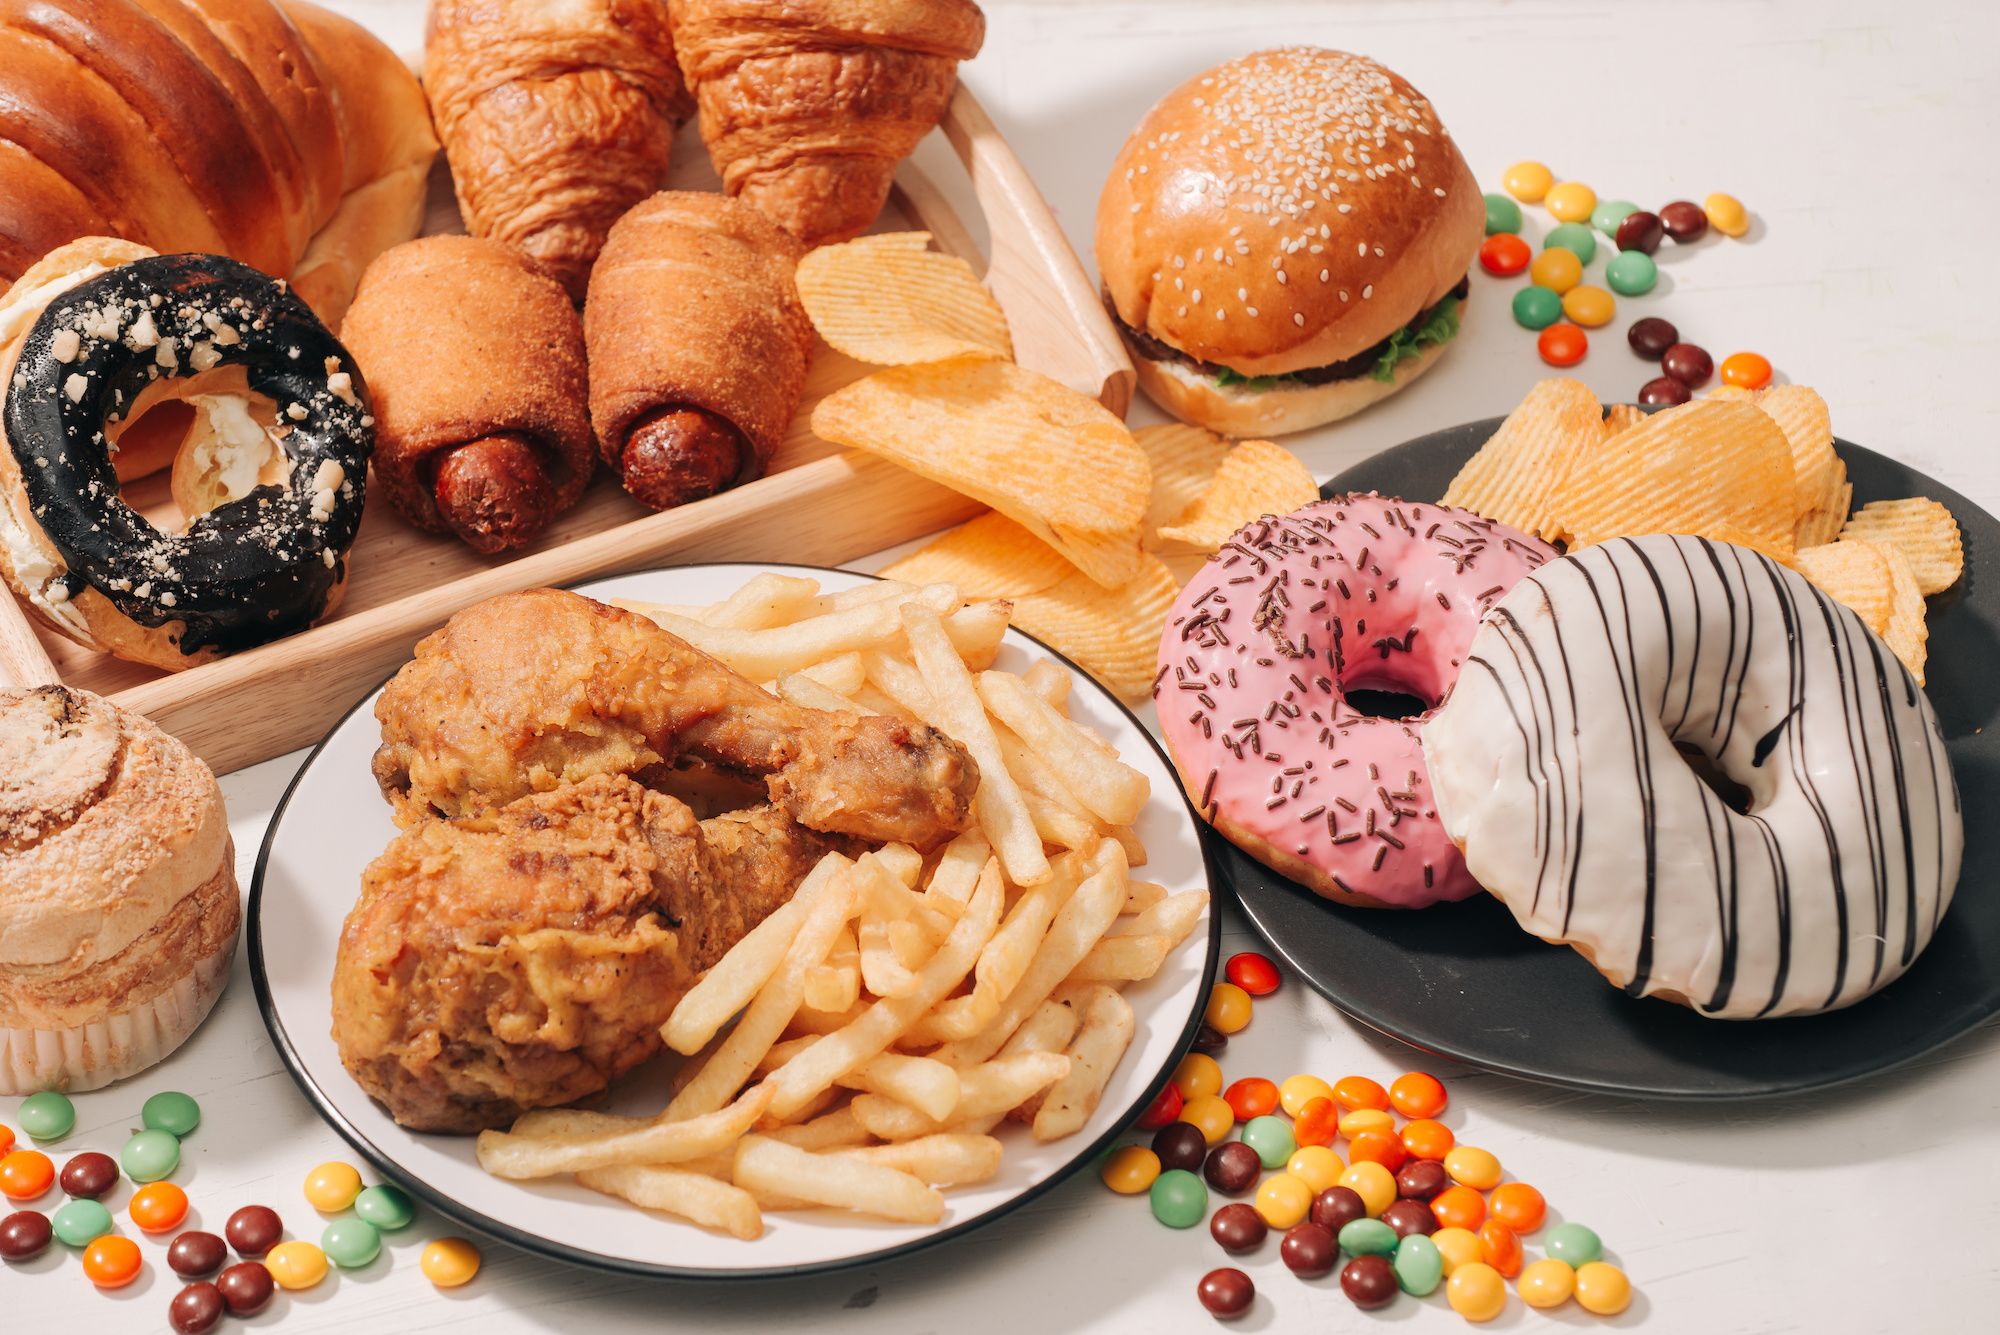 Eating highly processed foods linked to weight gain